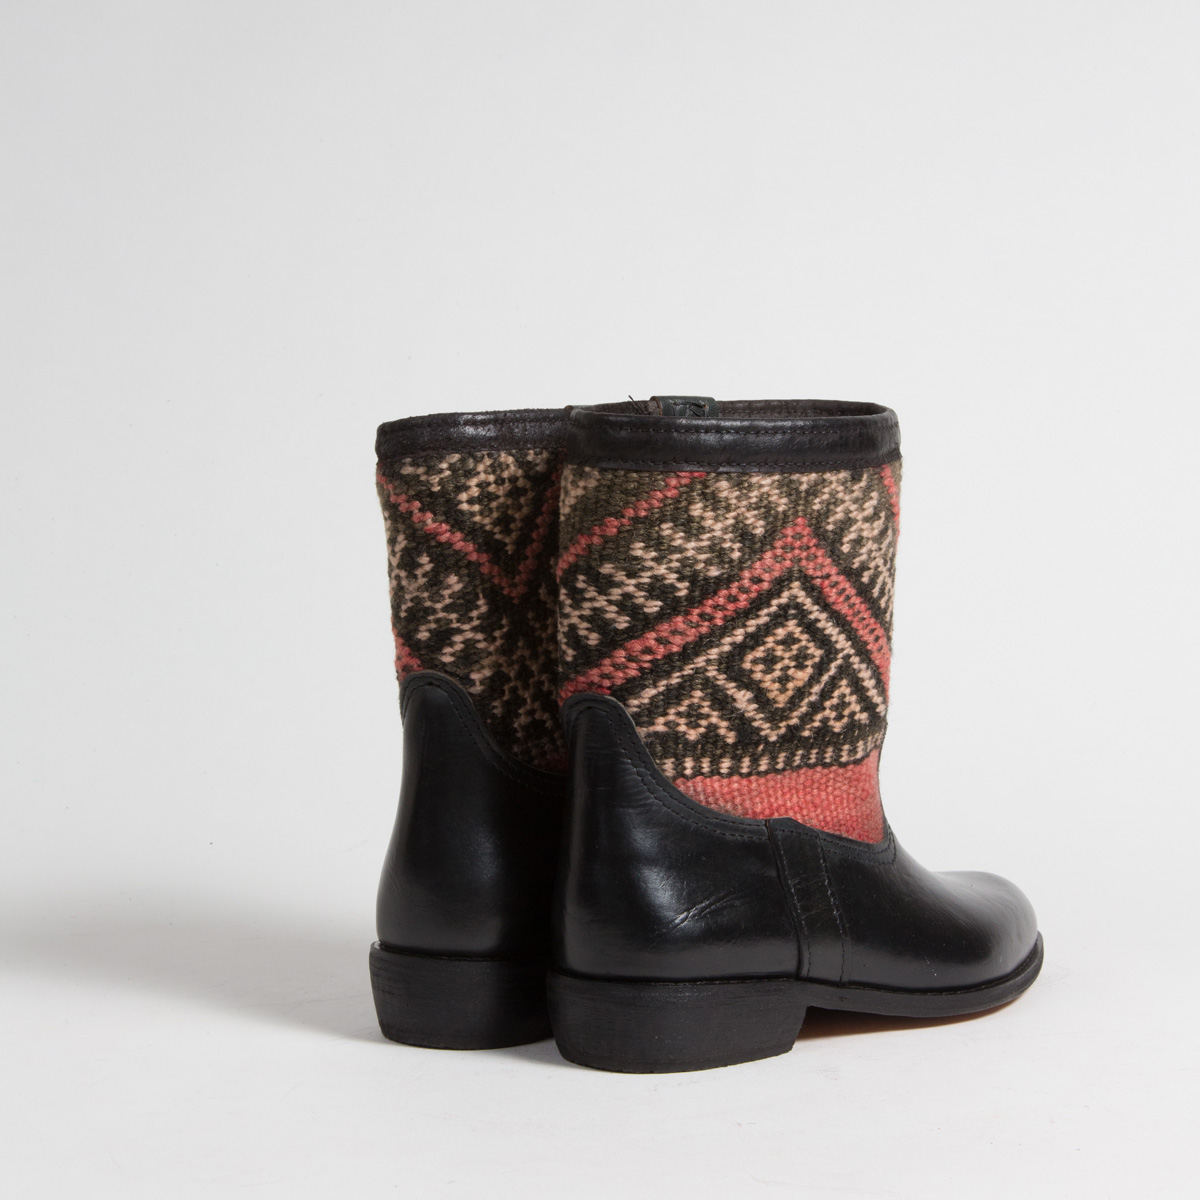 Bottines Kilim cuir mababouche artisanales (Réf. RPN5-37)